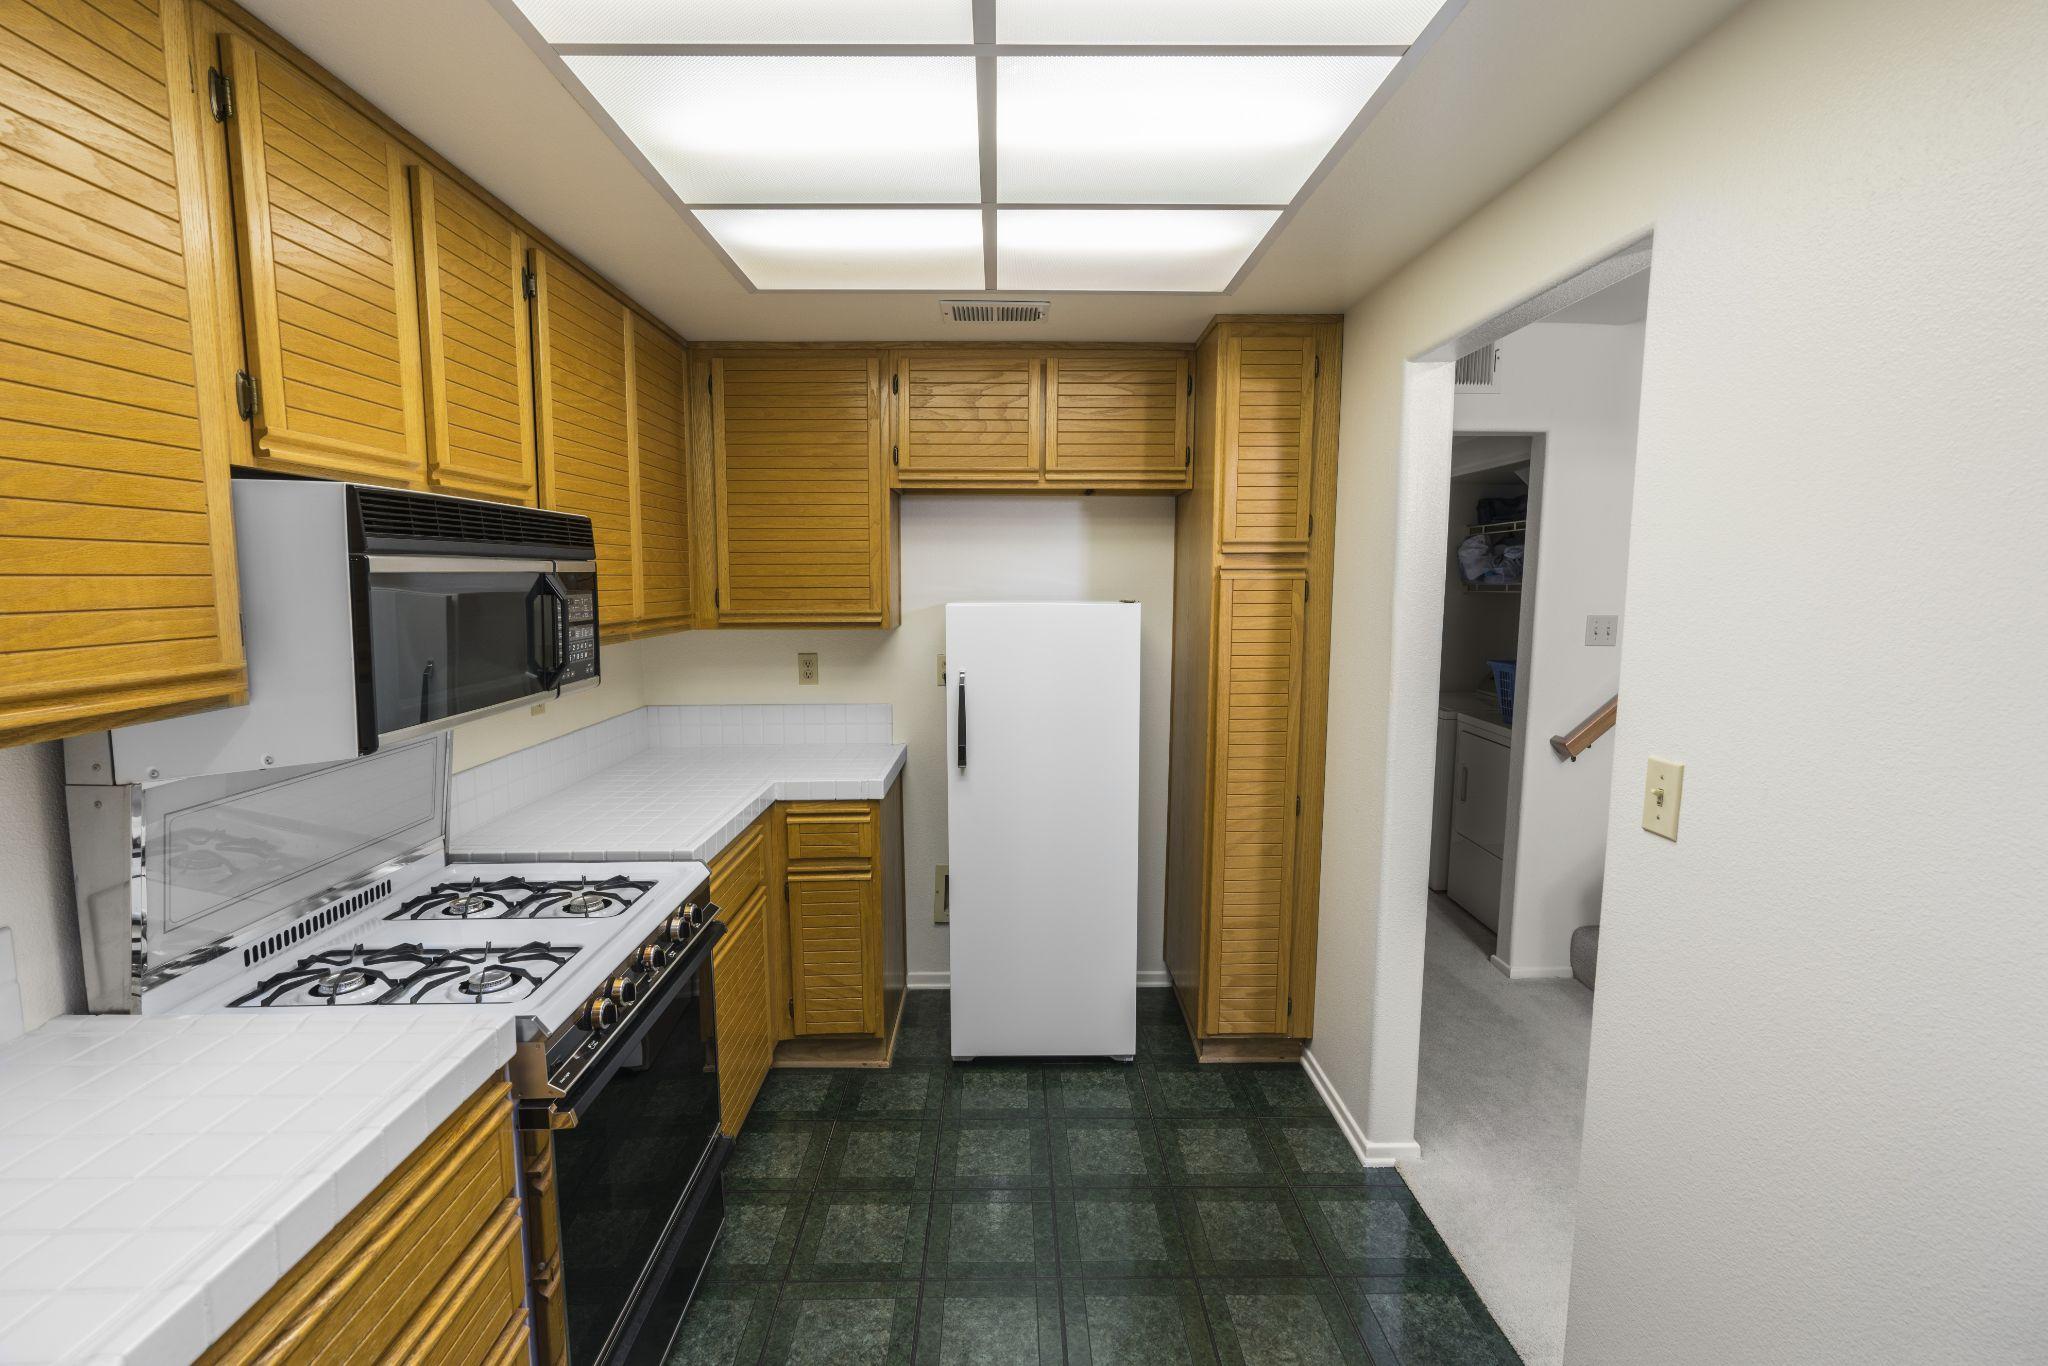 kitchen with oak cabinets, tile countertops, gas stove and green flooring